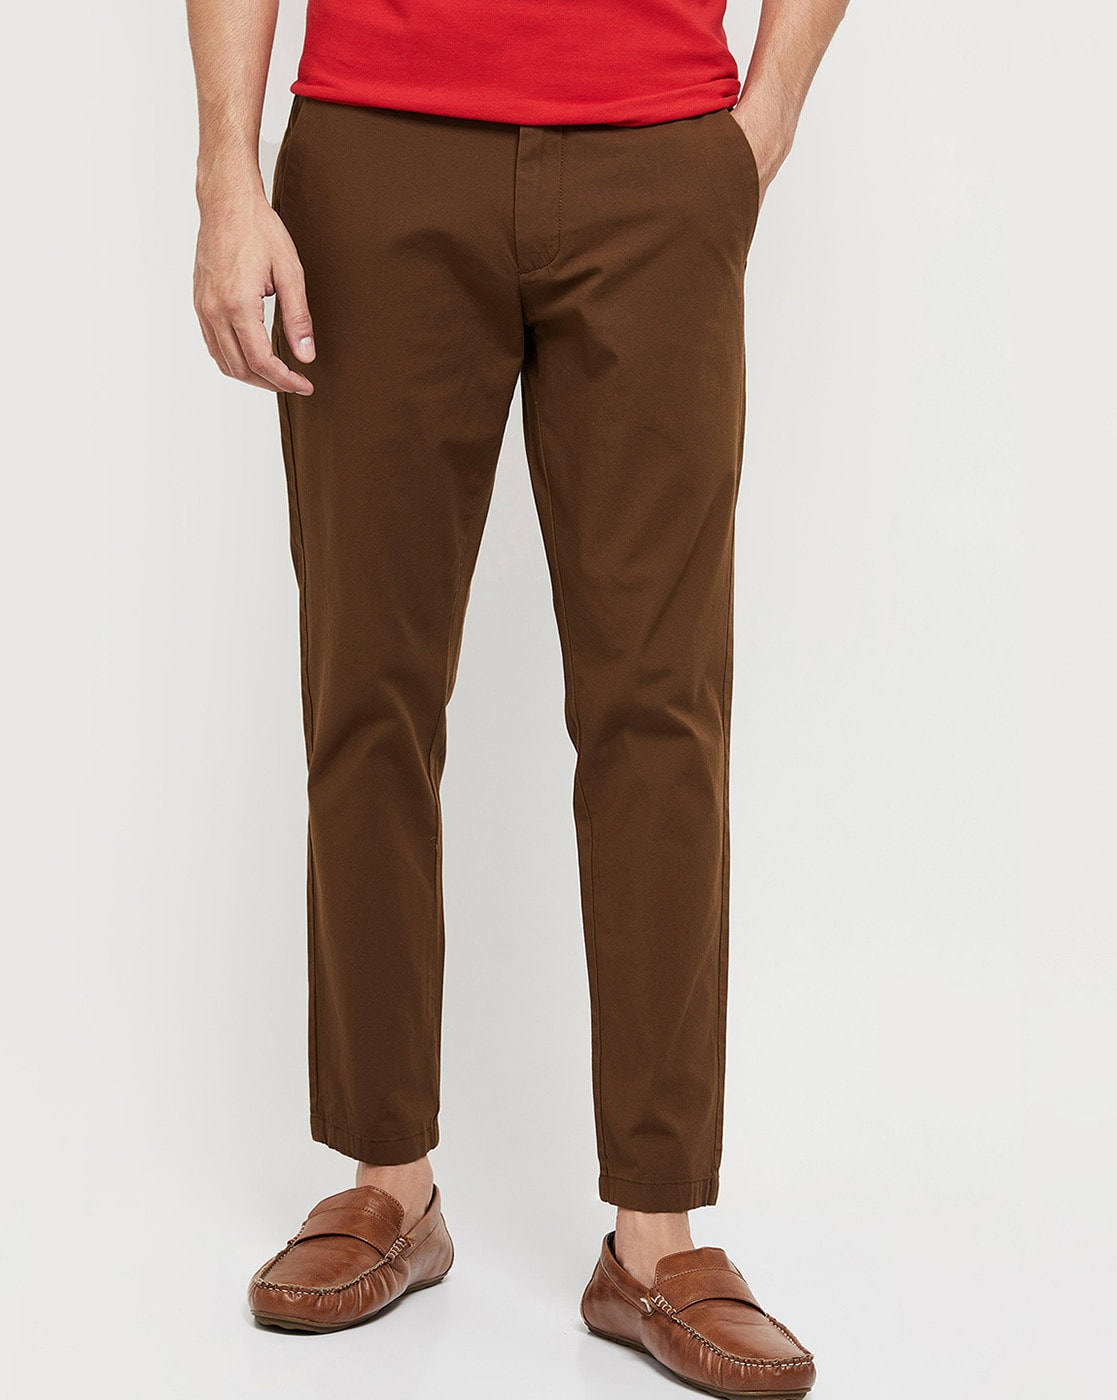 Buy Brown Trousers  Pants for Women by MAX Online  Ajiocom